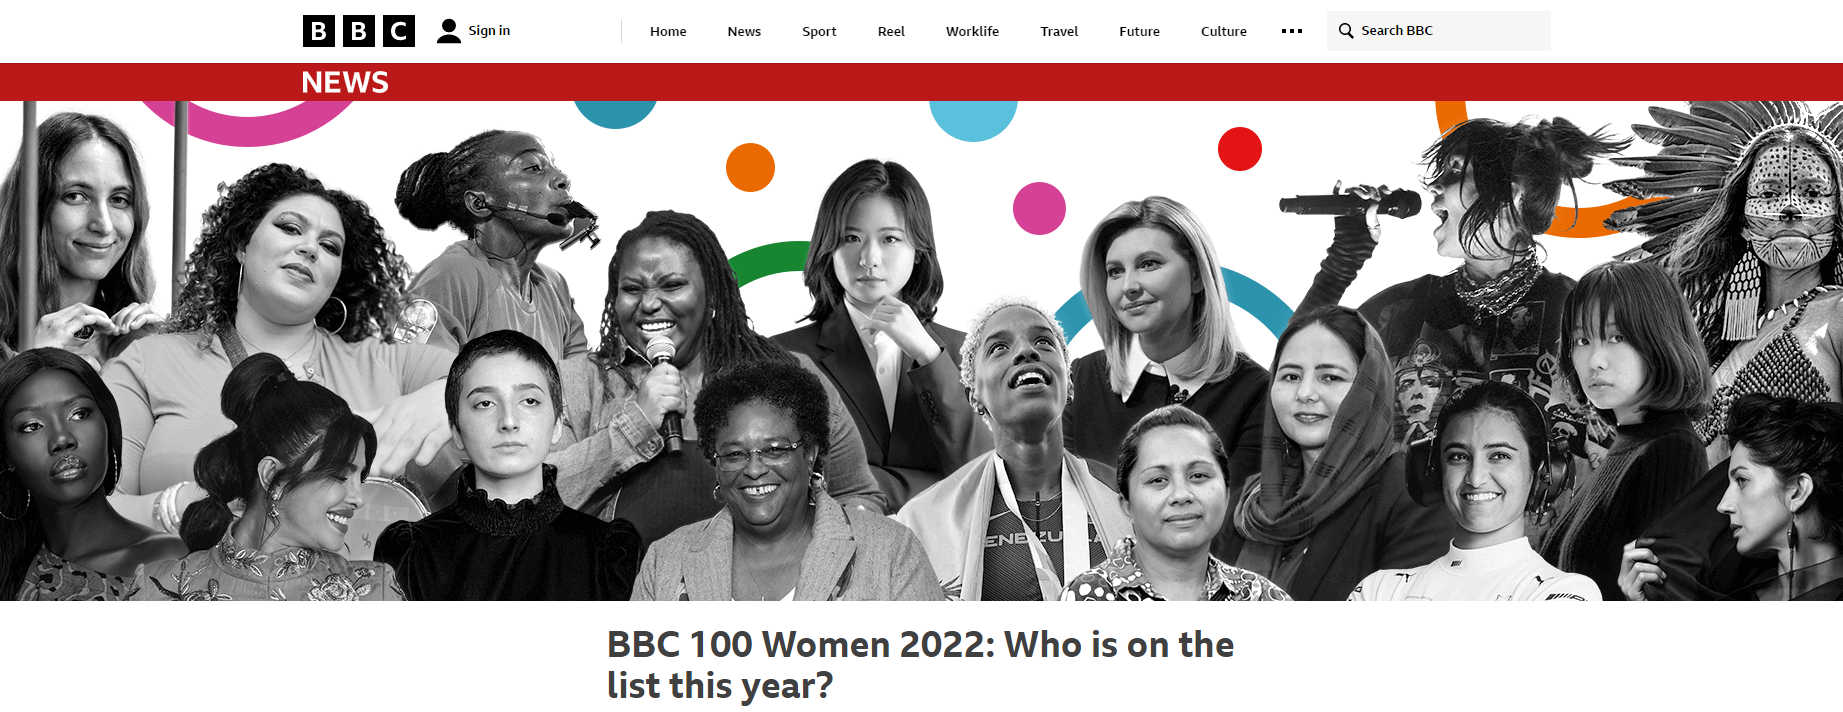 Screenshot of BBC’s report on 100 Women for 2022. Link: https://www.bbc.co.uk/news/resources/idt-75af095e-21f7-41b0-9c5f-a96a5e0615c1